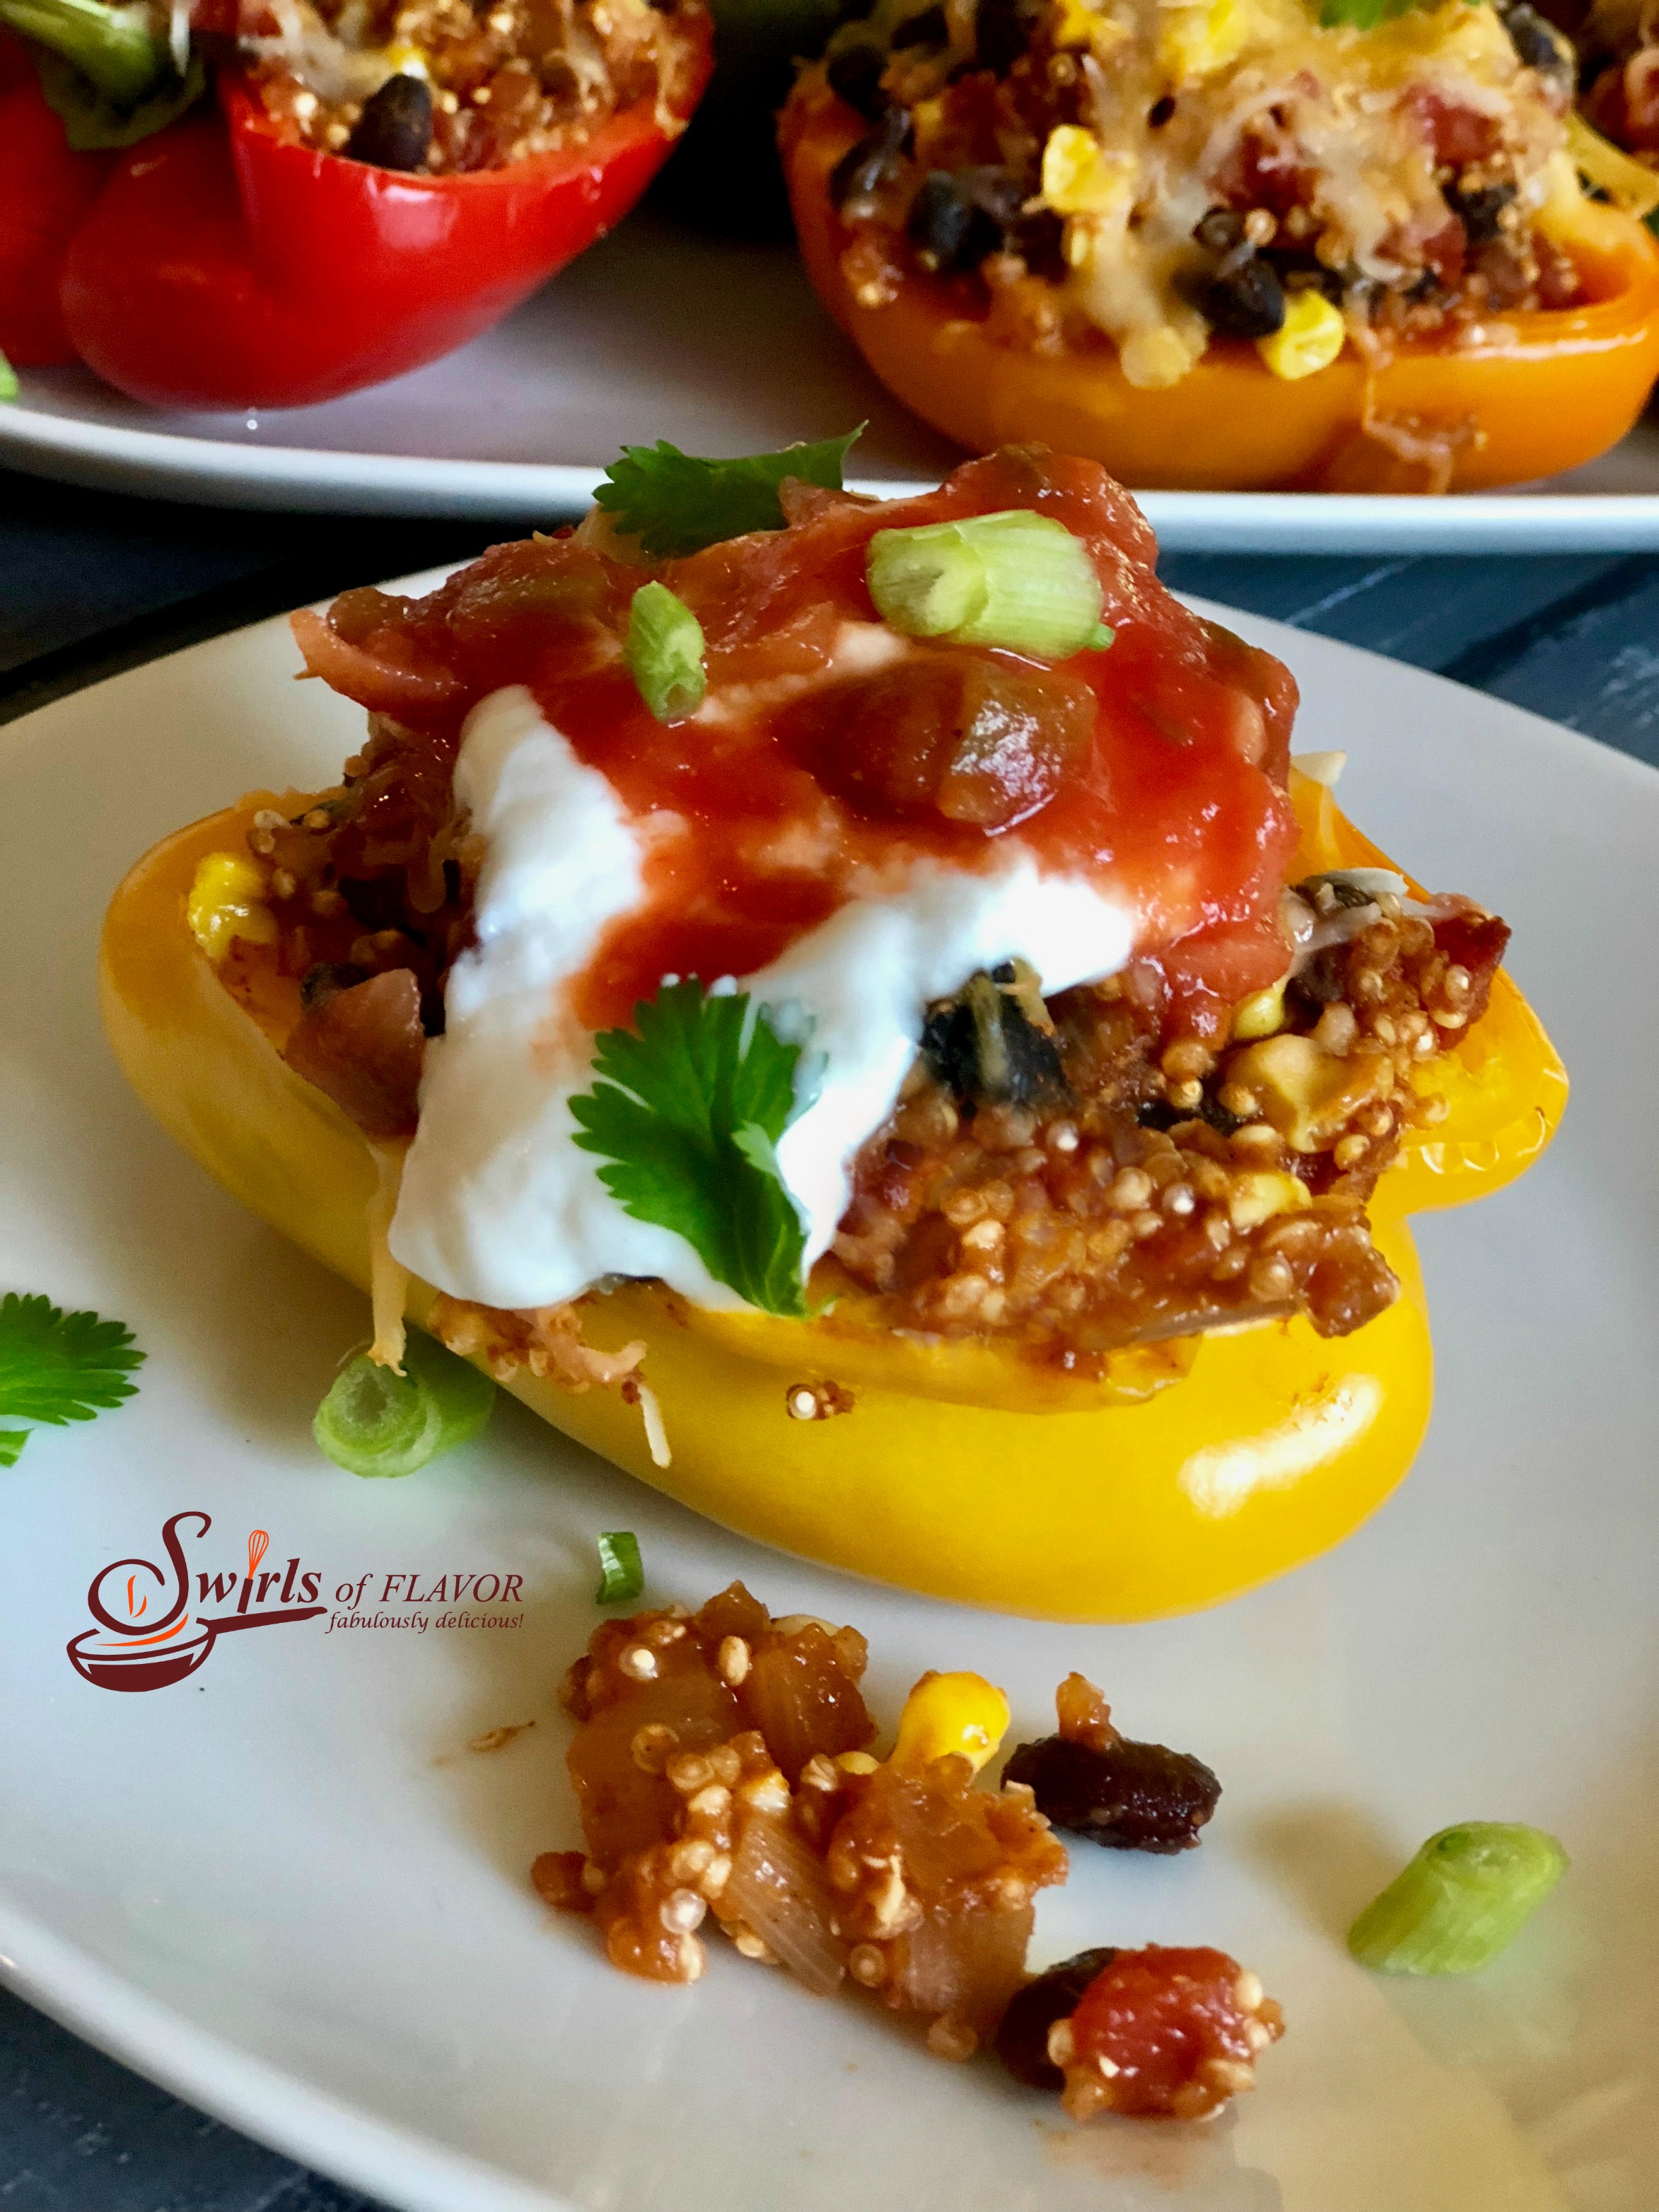 Mexican Quinoa Stuffed Peppers is an easy recipe that's perfect for a weeknight dinner and beautiful enough to serve to guests. Stuffed peppers take on a Mexican flair, bursting with a filling of quinoa, black beans, corn, tomatoes and salsa. #peppers #stuffedpeppers #quinoa #quinoastuffedpeppers #blackbeans #corn #easyrecipe #dinner #weeknightdinner #comfortfood #swirlsofflavor